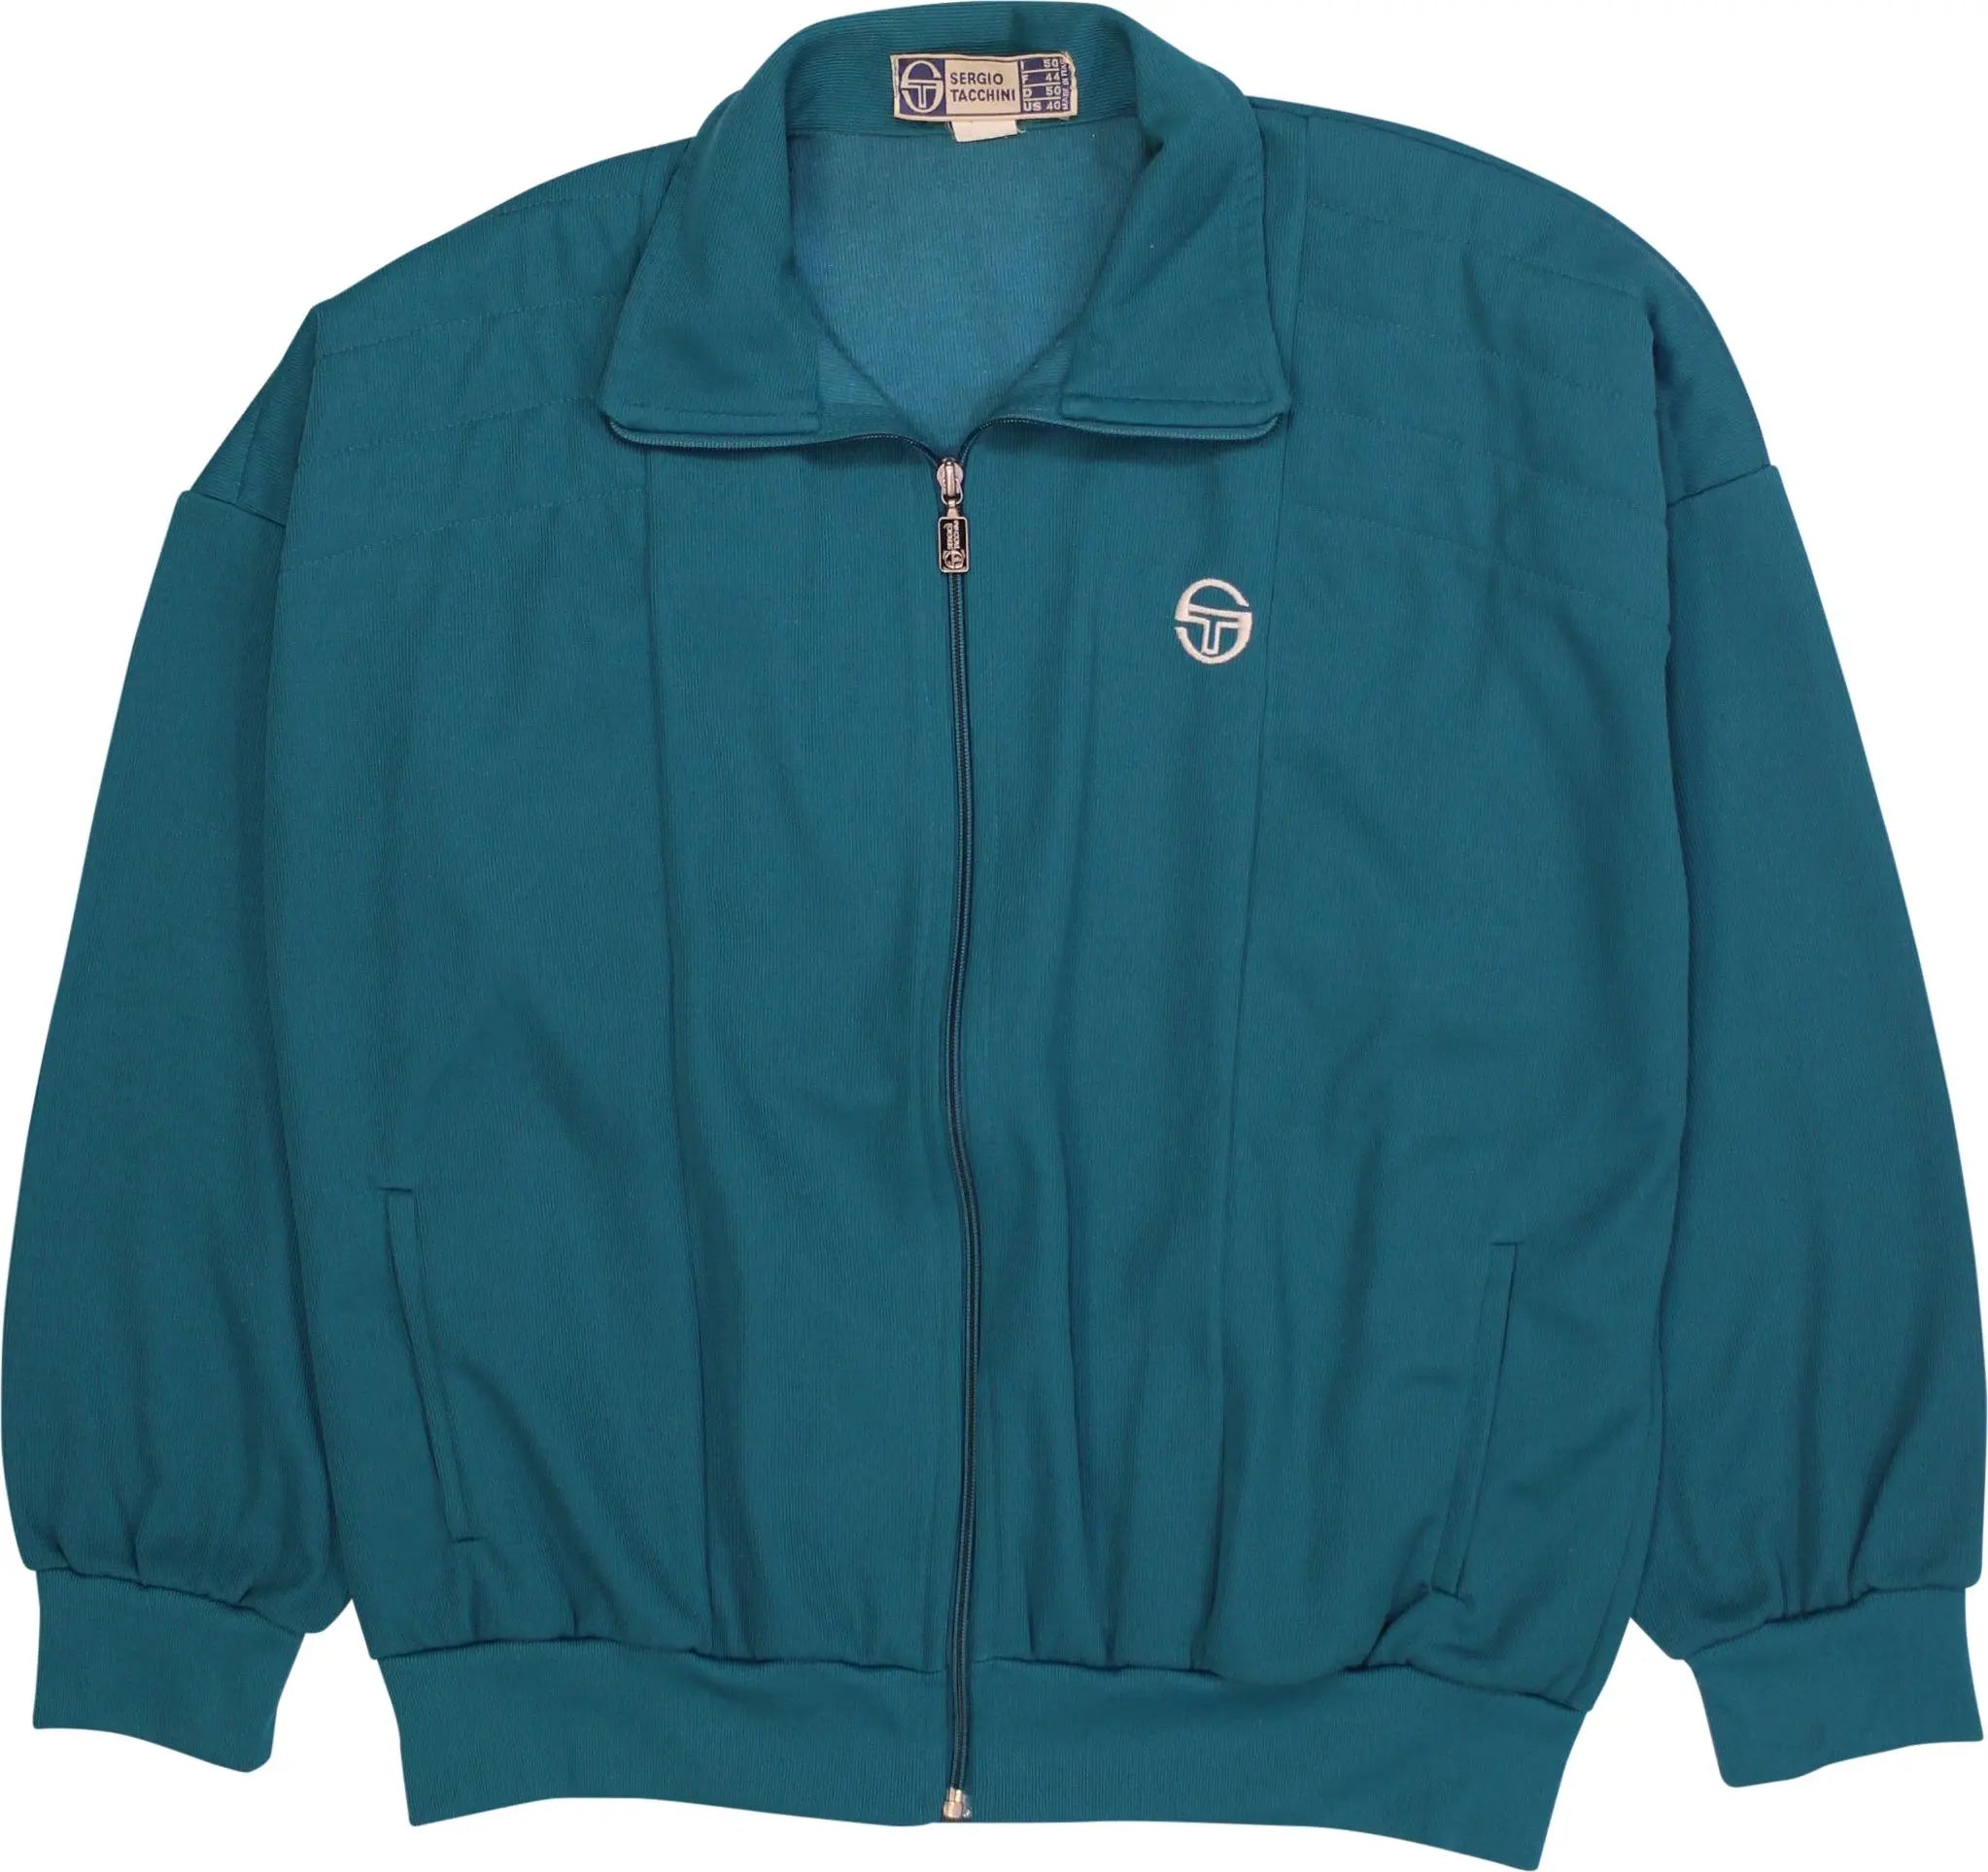 Sergio Tacchini - Green Track Jacket by Sergio Tacchini- ThriftTale.com - Vintage and second handclothing